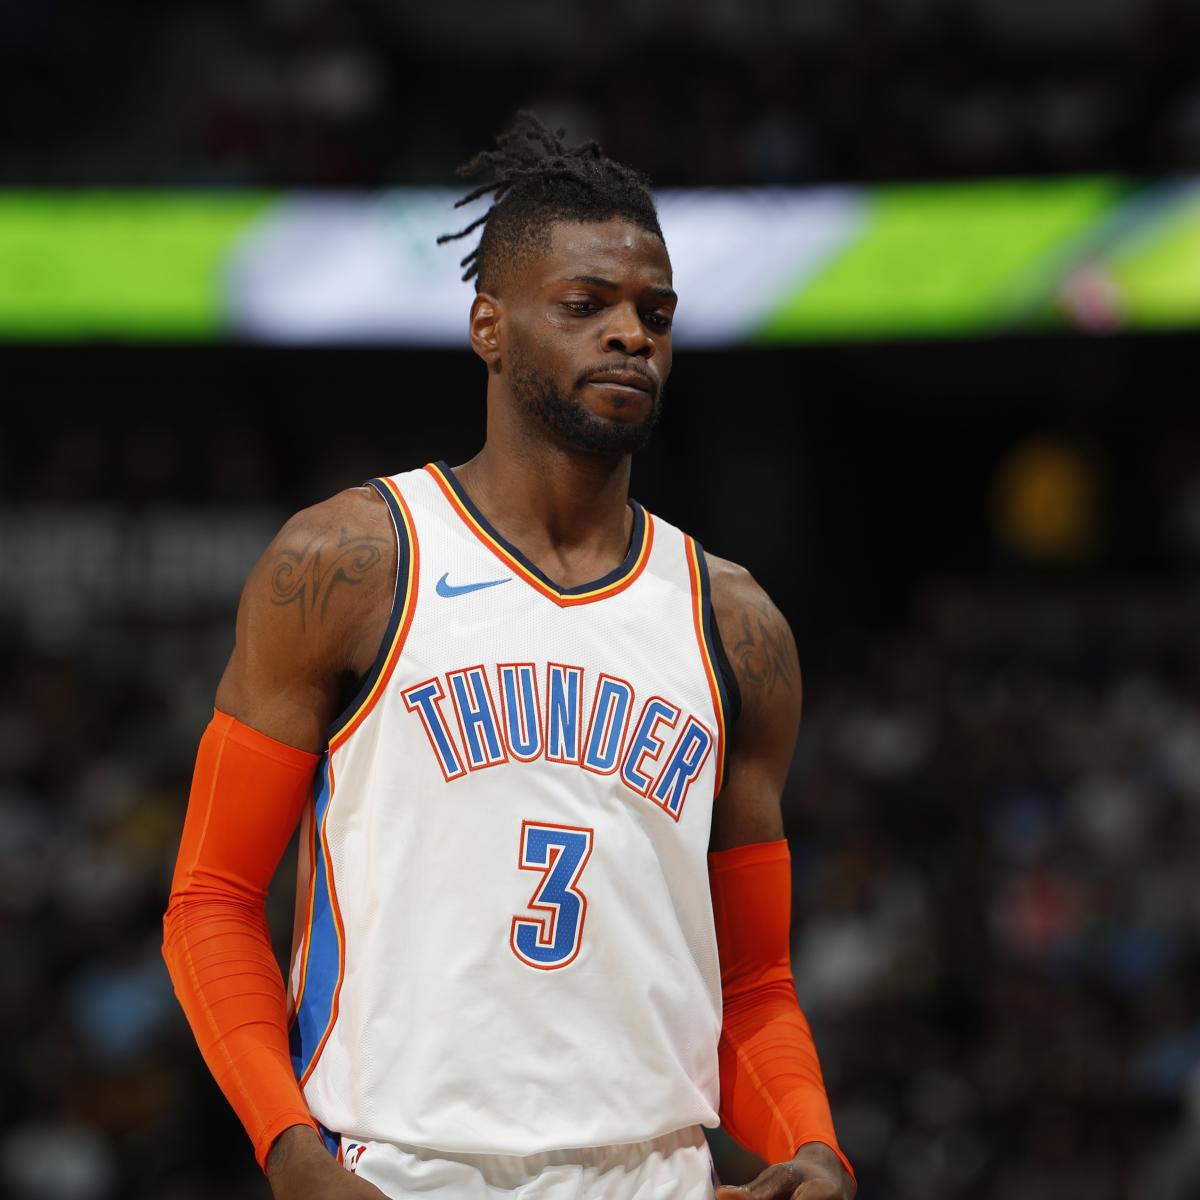 Nerlens Noel with the Oklahoma City Thunders (Source: Bleacher Report)